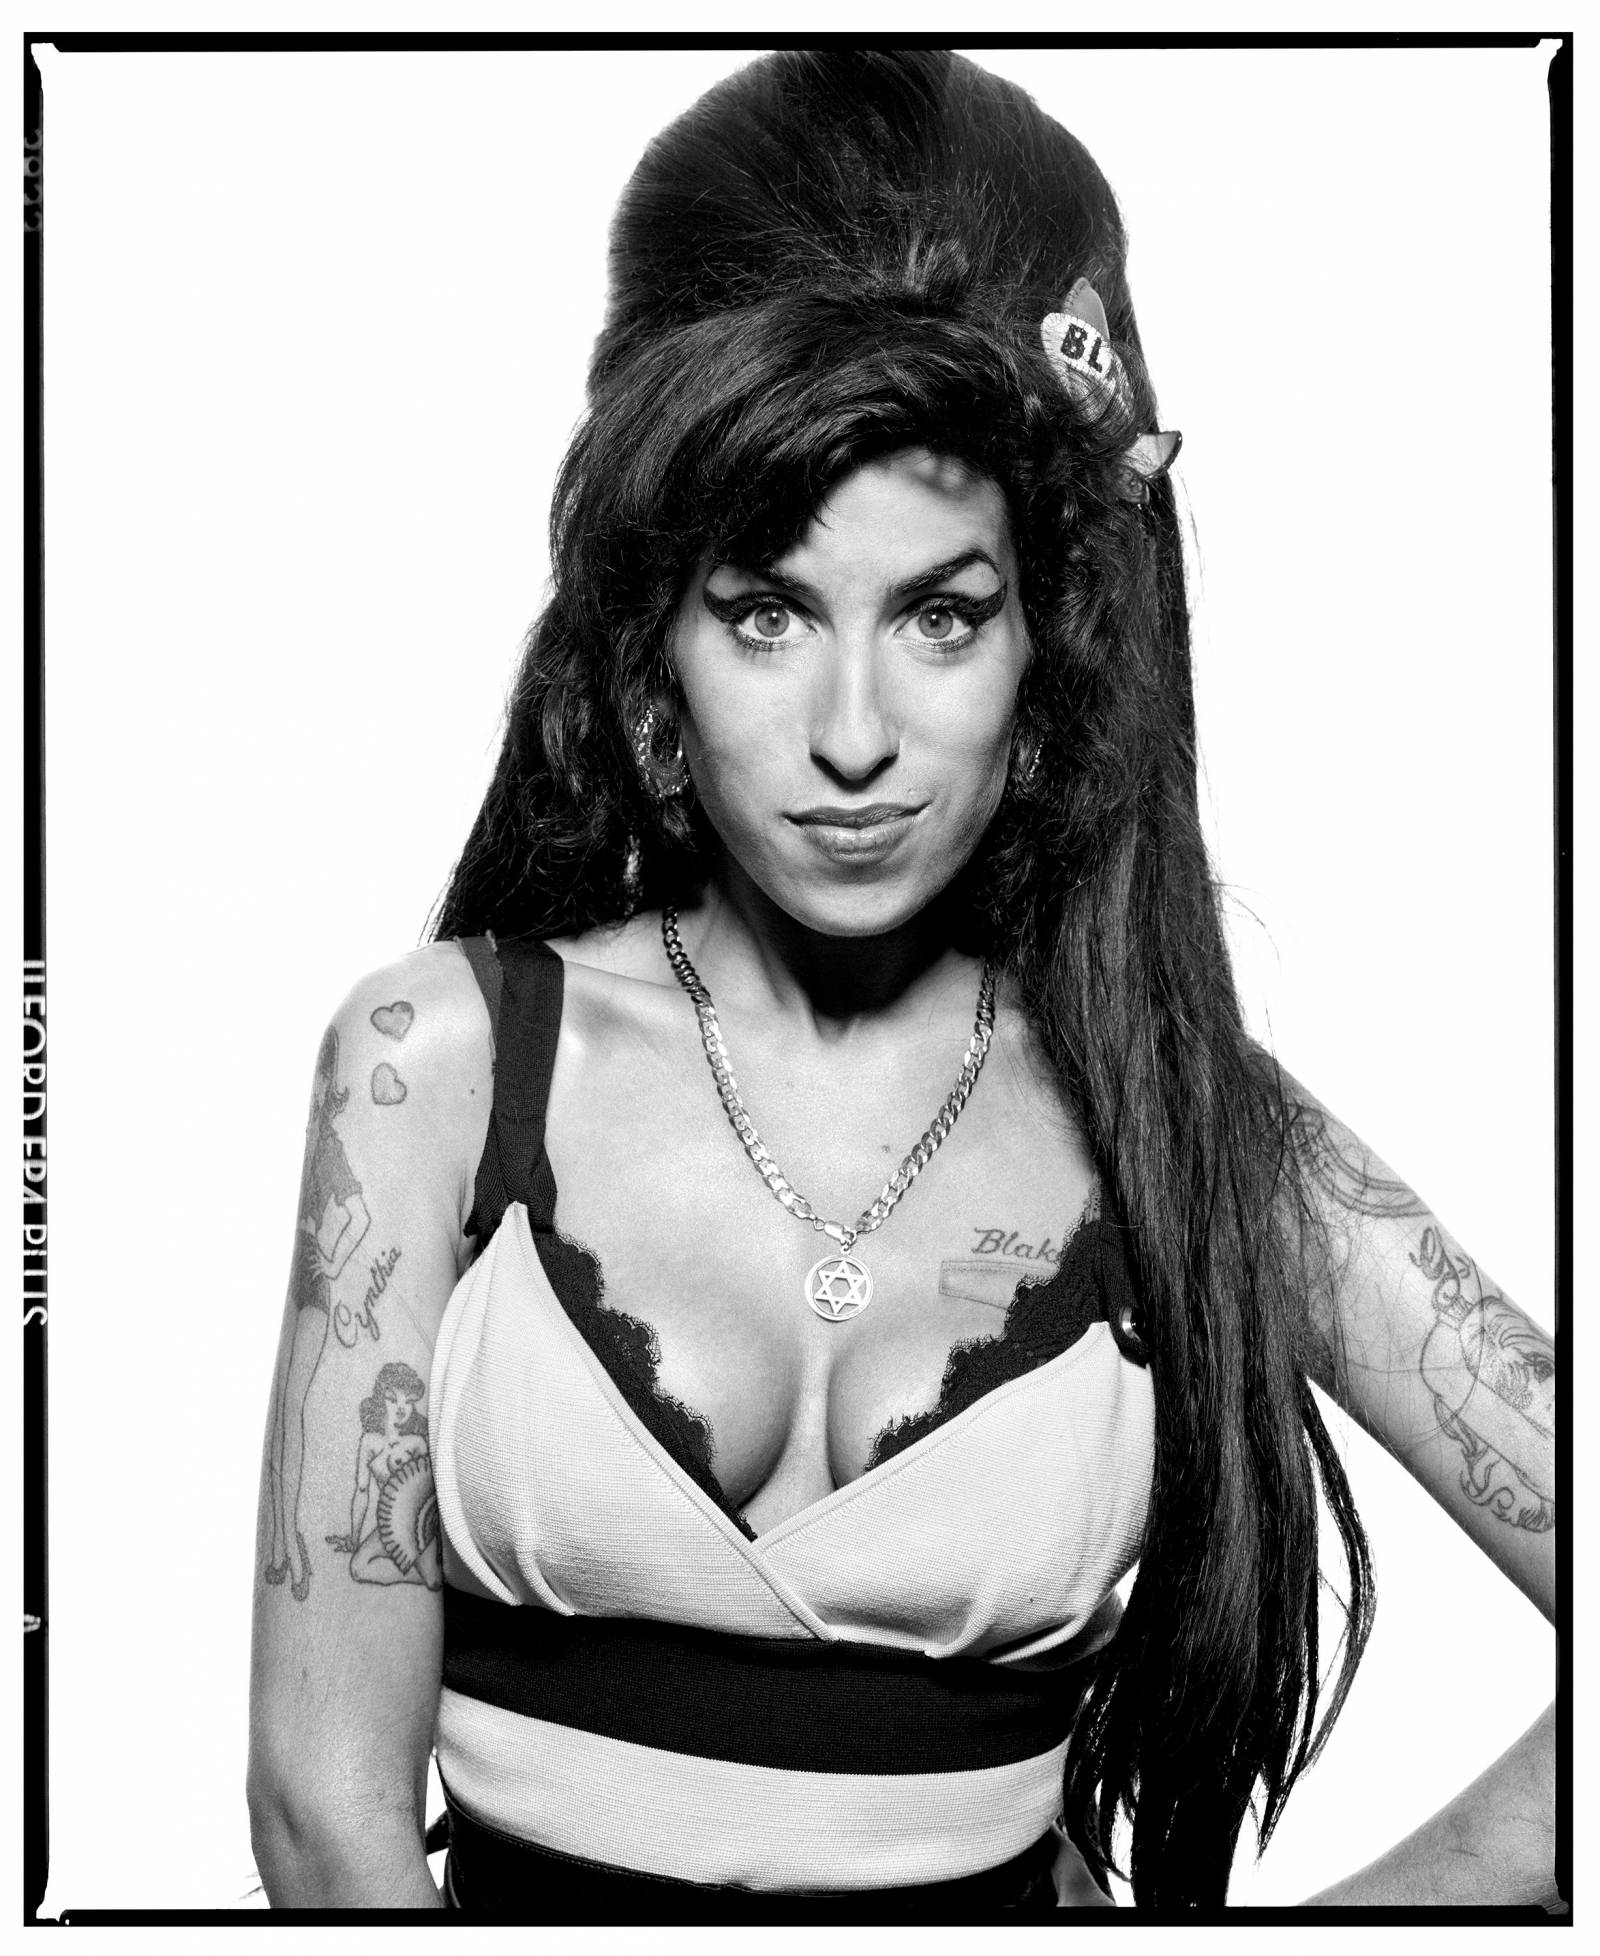 
‘Amy Winehouse backstage at an honorary concert for Nelson Mandelas 90th birthday in Hyde Park, London’, 2008 (©Terry ONeill/Iconic Images)